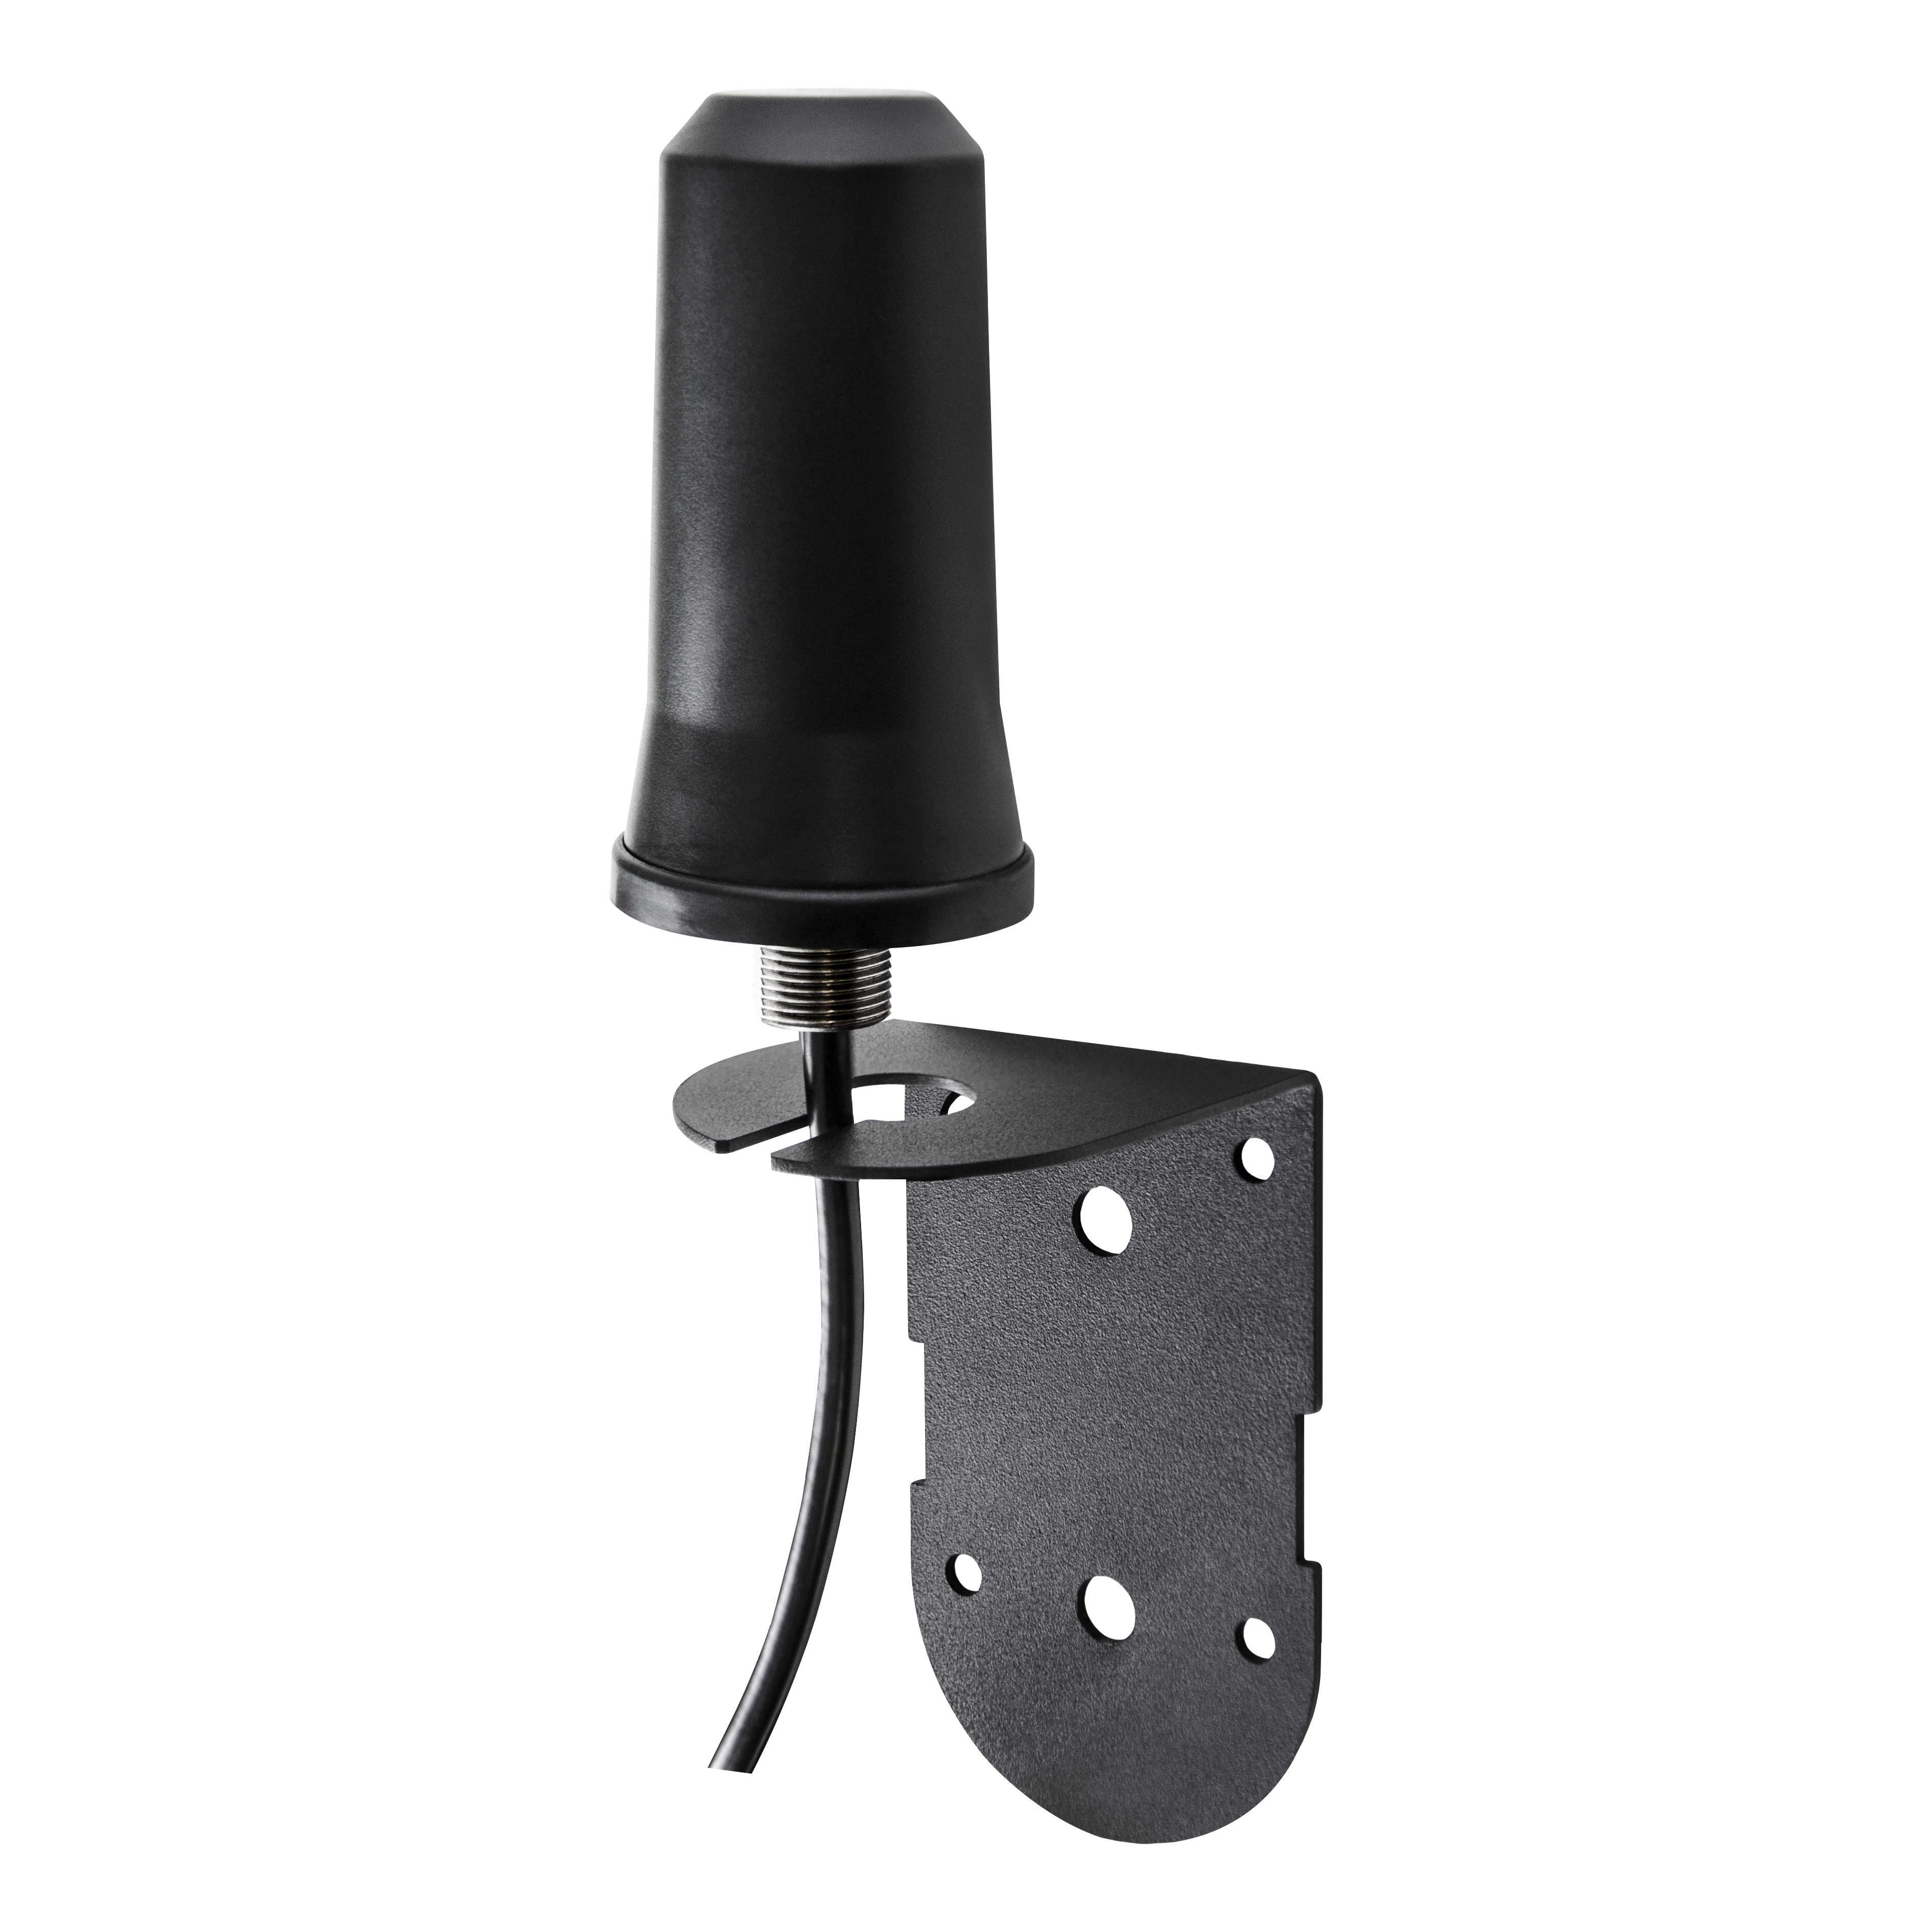 SPYPOINT® Cellular Trail Camera Booster - Bracket Attached View